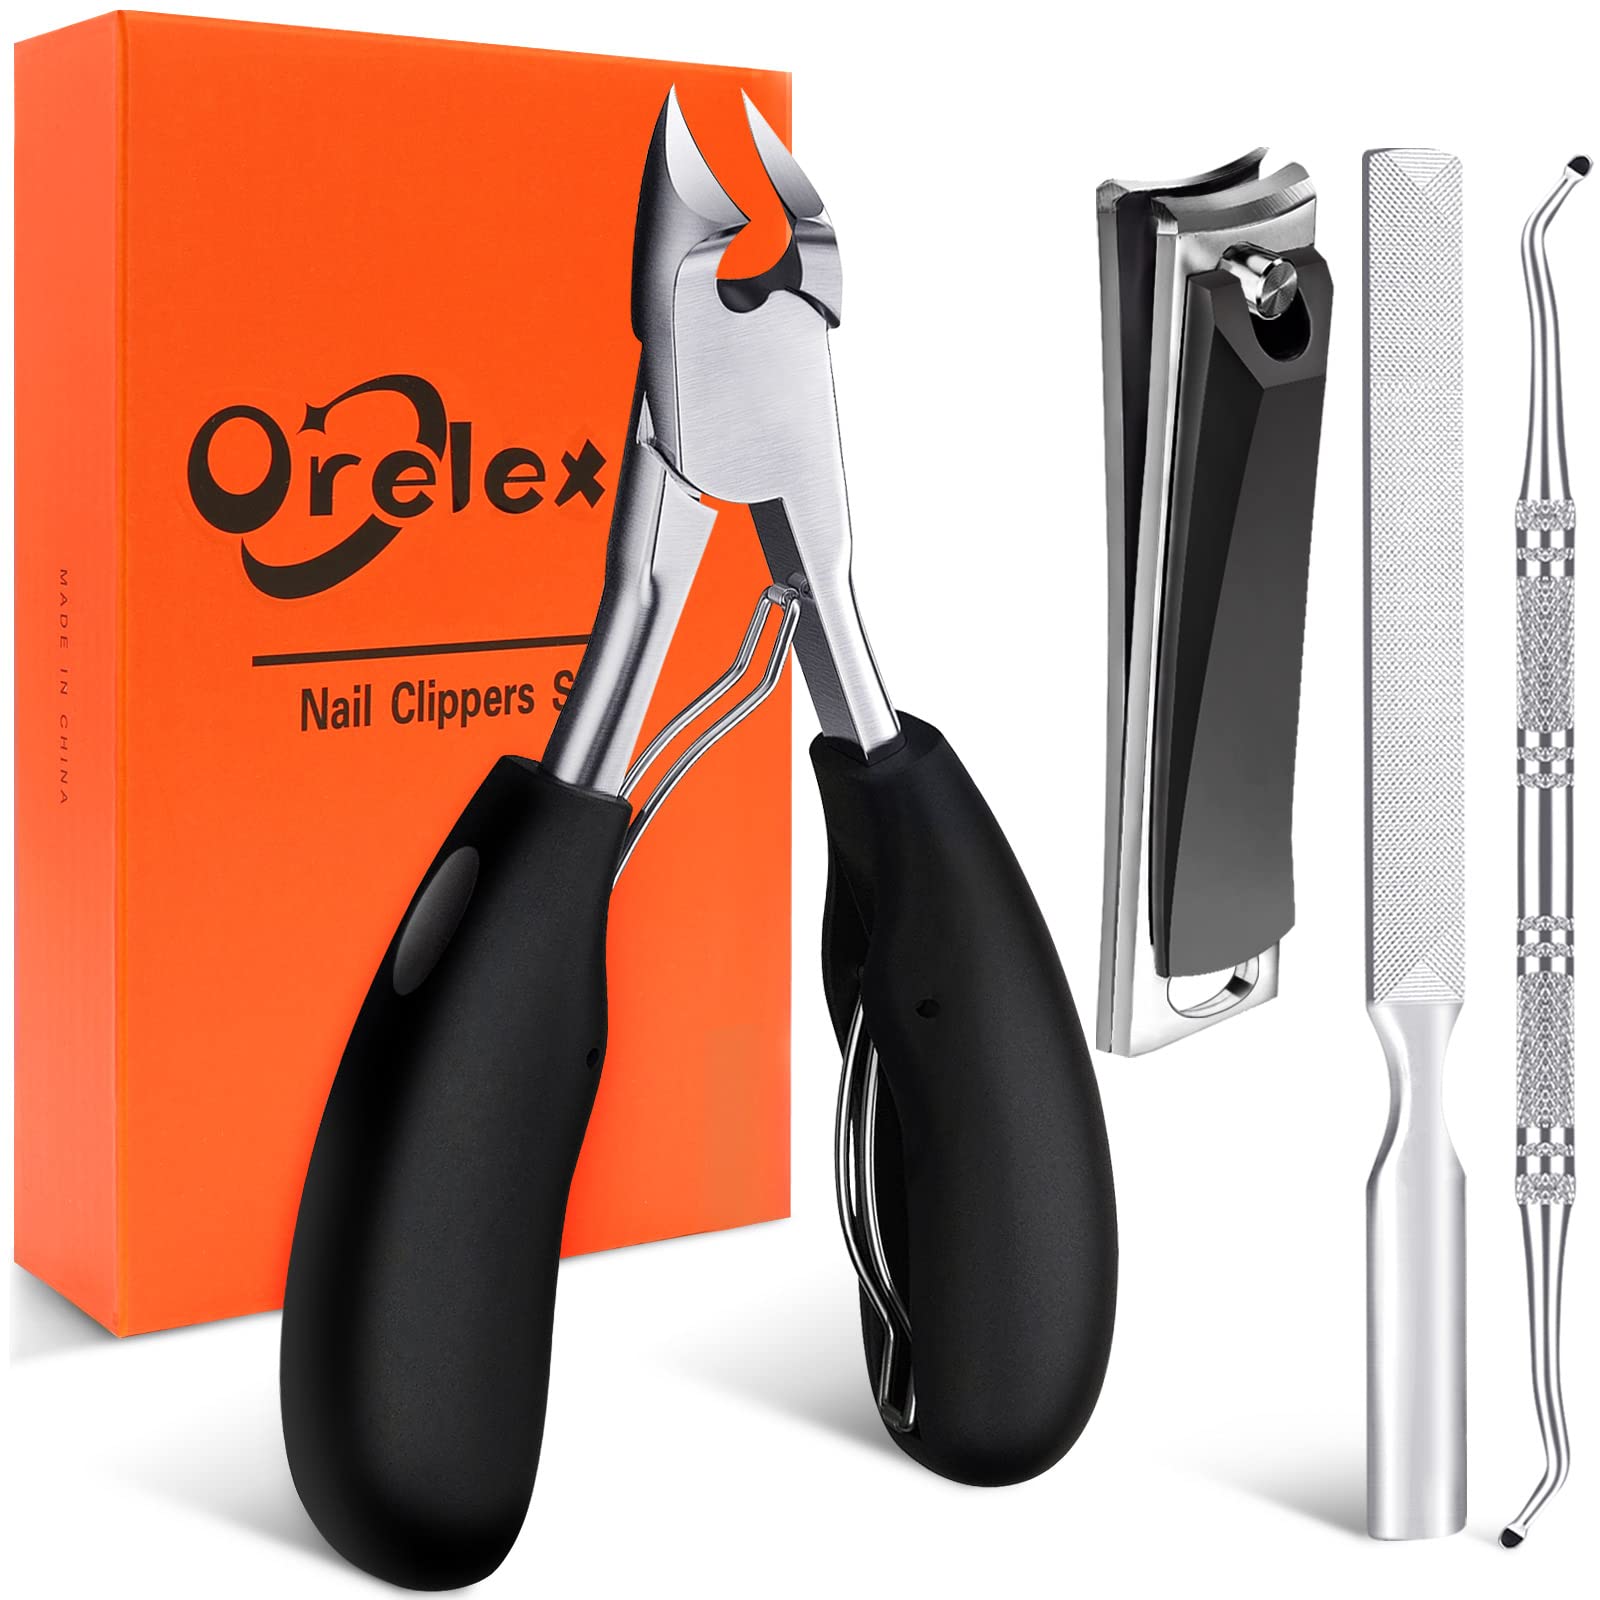 NYK1 Toenail Clippers for Hard and Ingrown Toe Nails